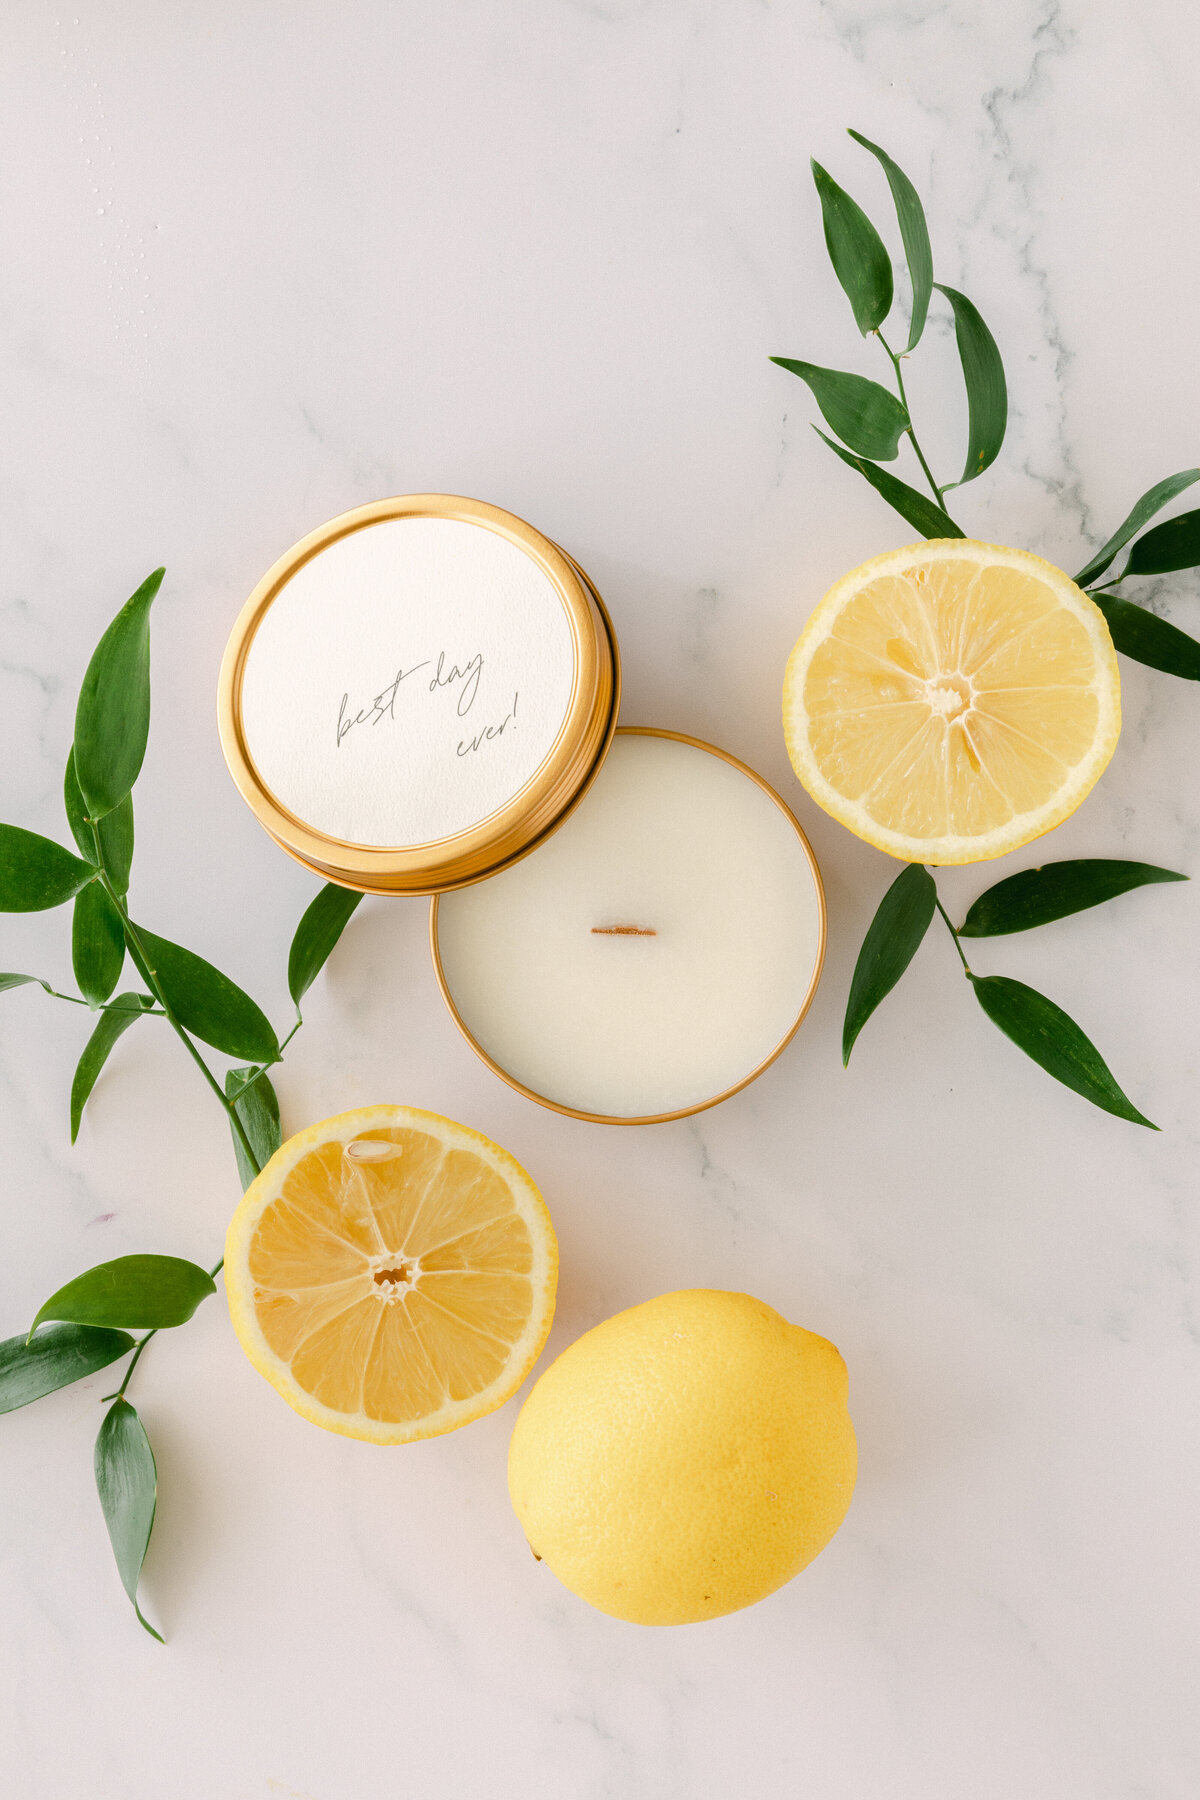 Best Day Ever! Travel Candle Olive Leaf and Lemon 1